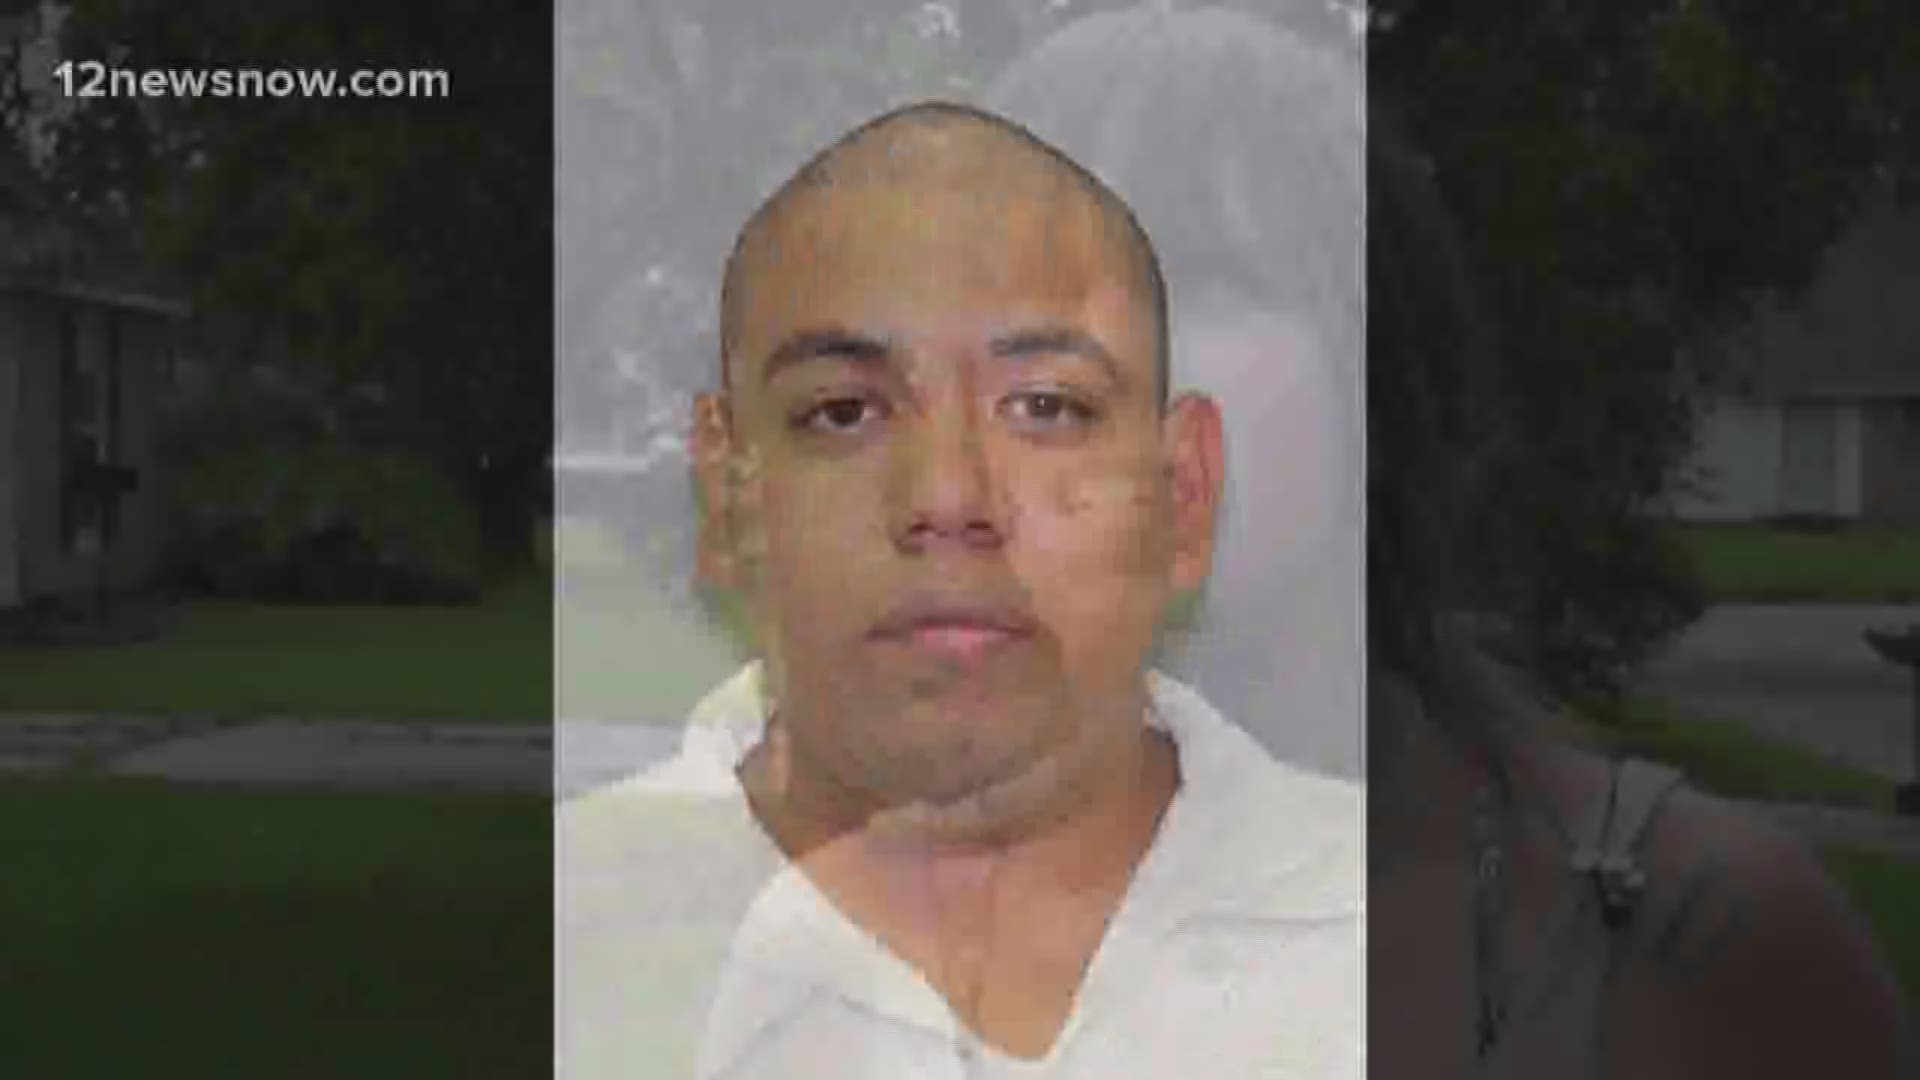 Luis Javier Crux Sanchez has a history of crime involving children, including two arrests in 2009 and 2012, both involving boys under the age of 10.He now moves into a neighborhood on Beaumont's west end, raising concerns for residents and their children's safety.